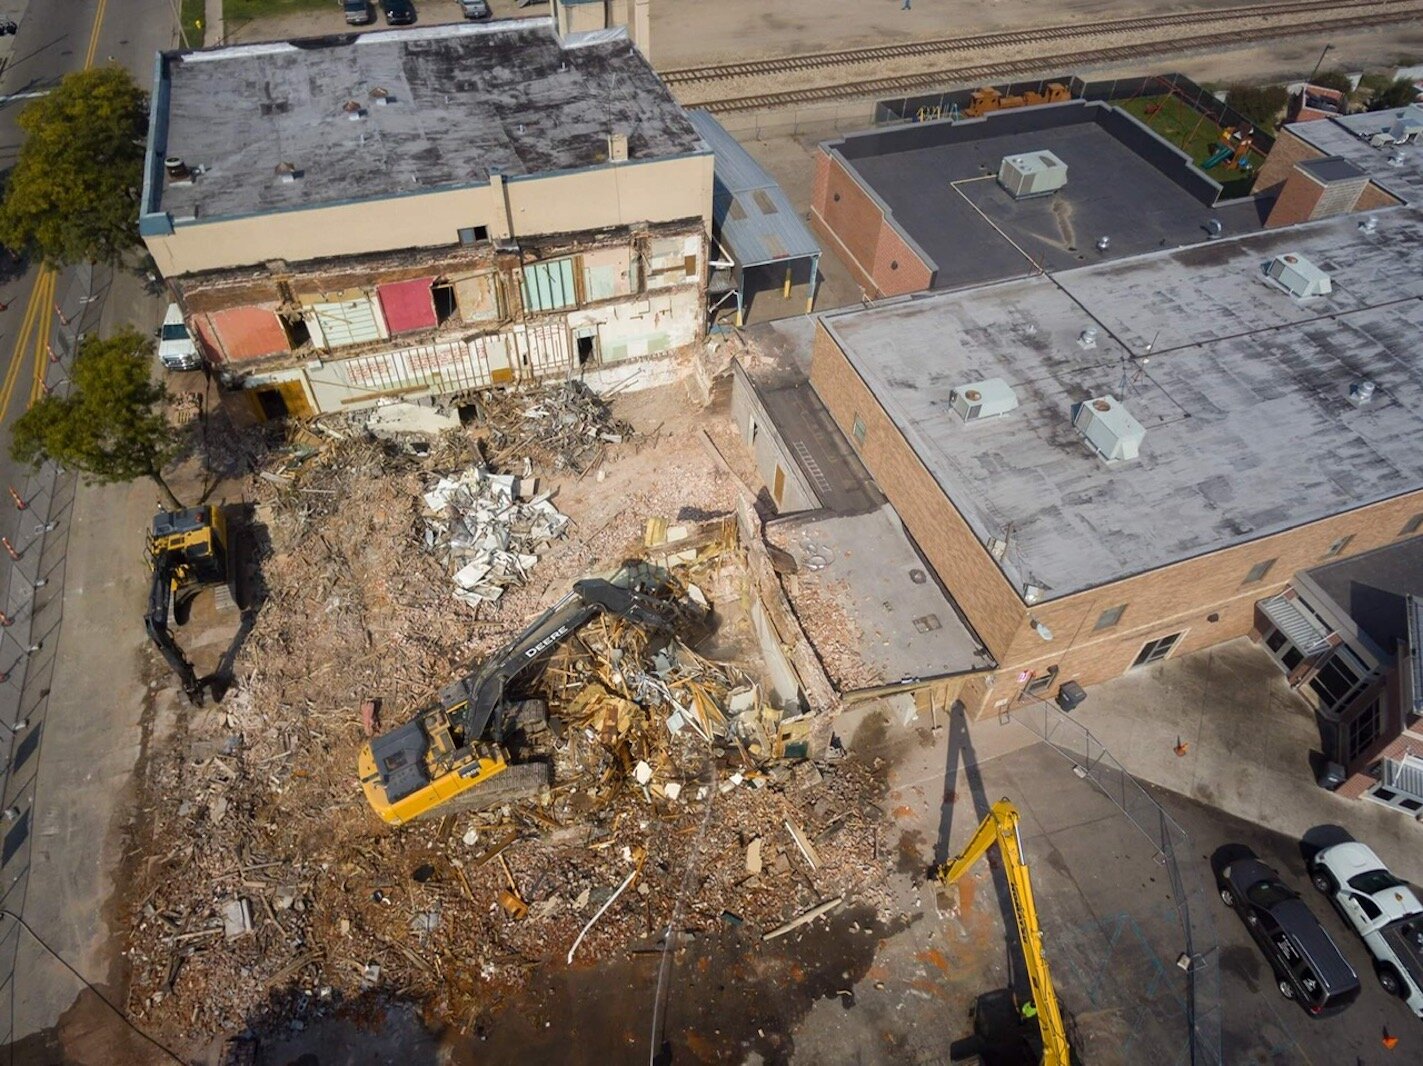 Demolition of four connected dilapidated structures on the downtown campus of the Kalamazoo Gospel Mission occurred in July of 2020.